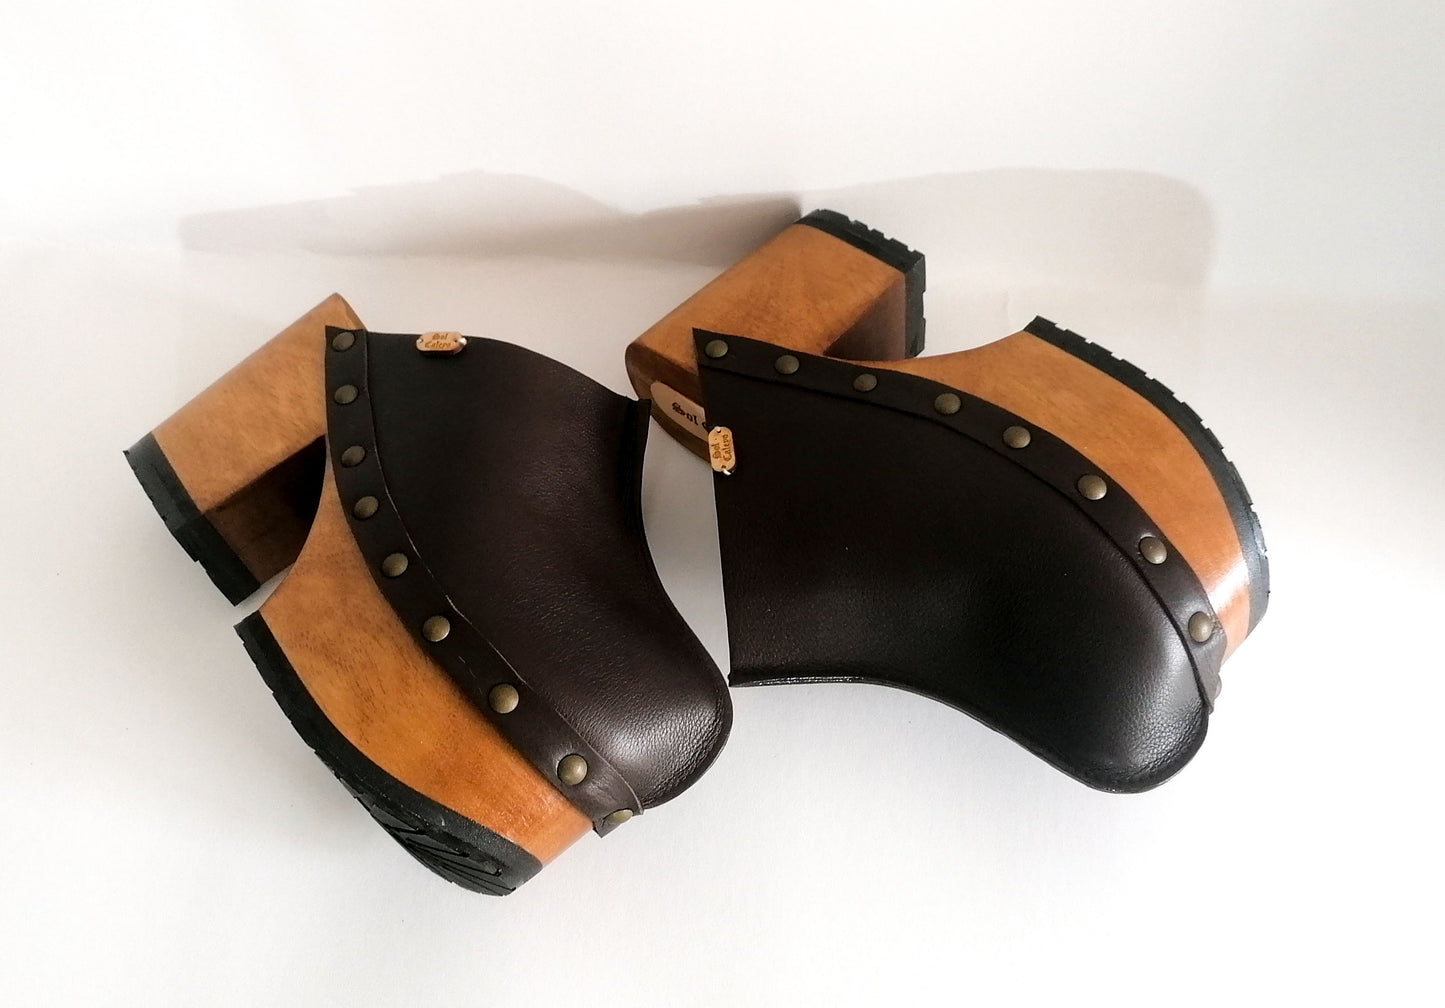 Brown leather clog. Vintage style platform clog. Leather clogs 70's style. Sizes 34 to 47. High quality handmade leather shoes by sol Caleyo. Sustainable fashion.